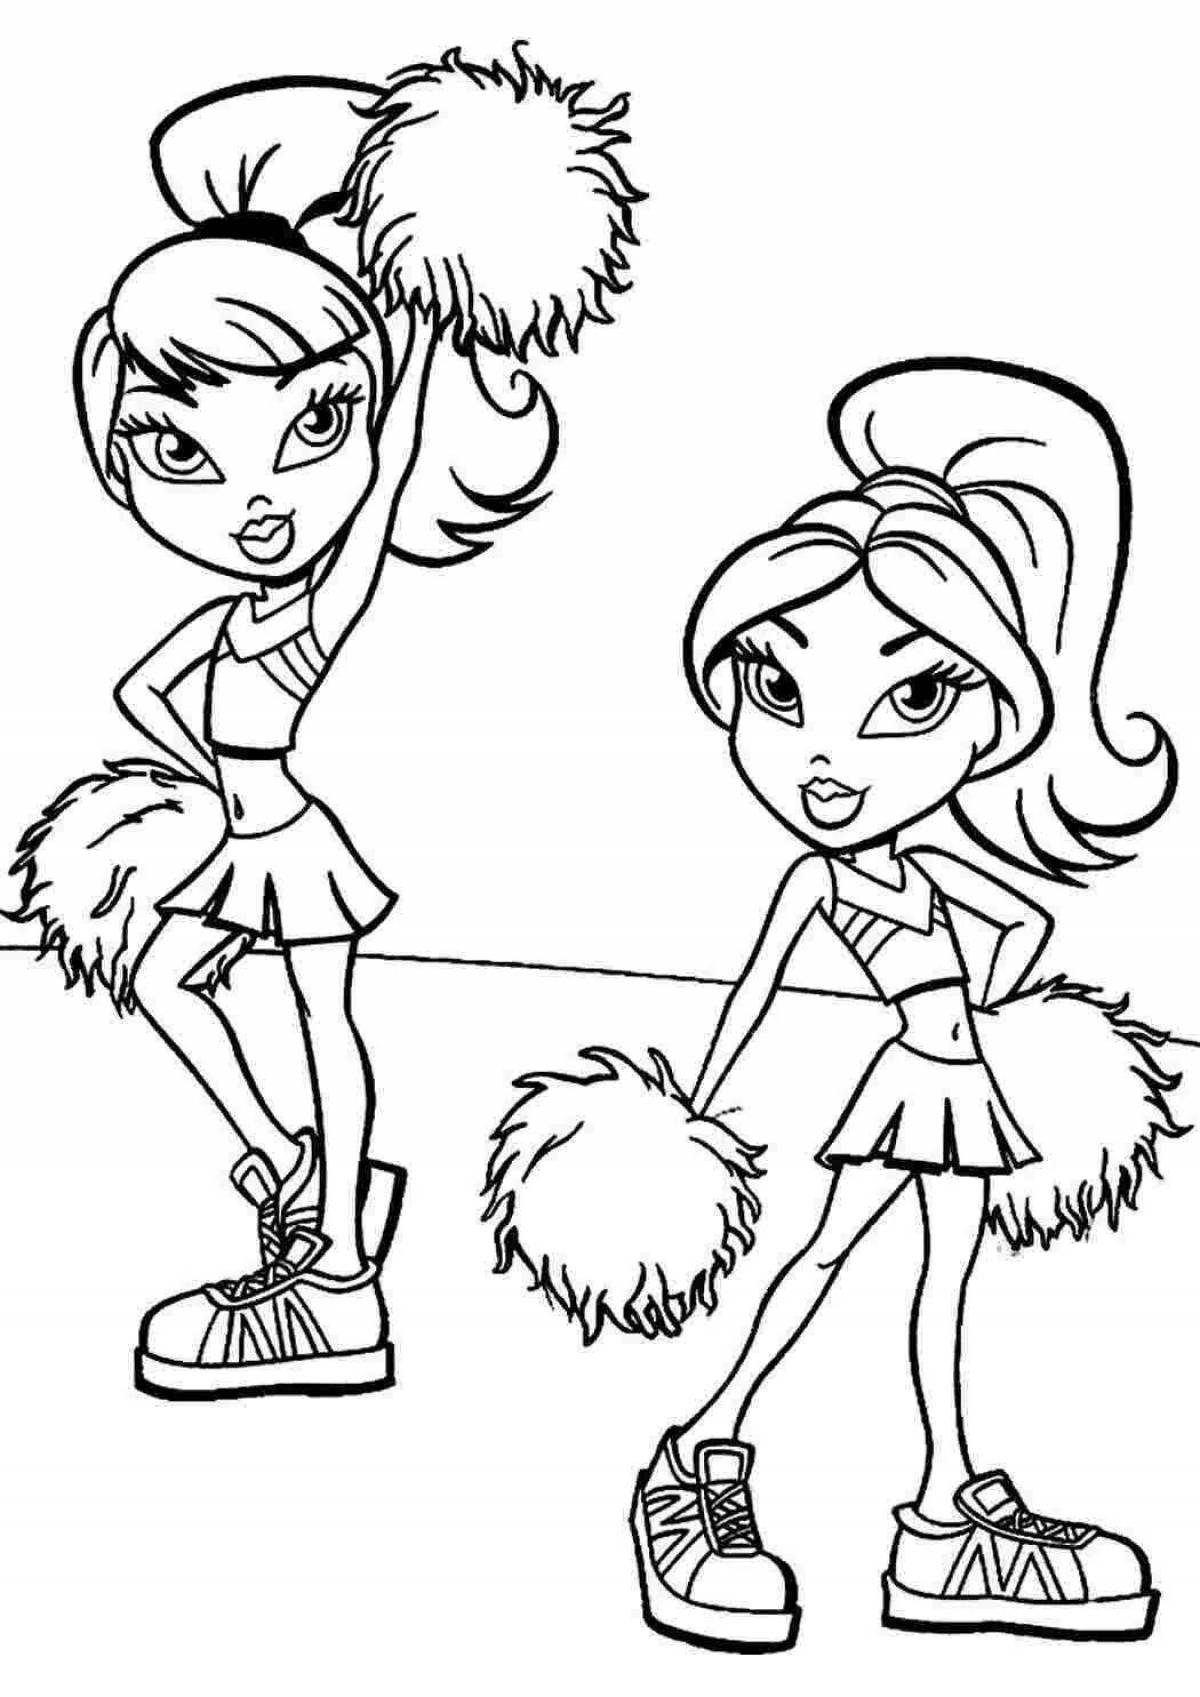 Fantastic bw coloring book for girls